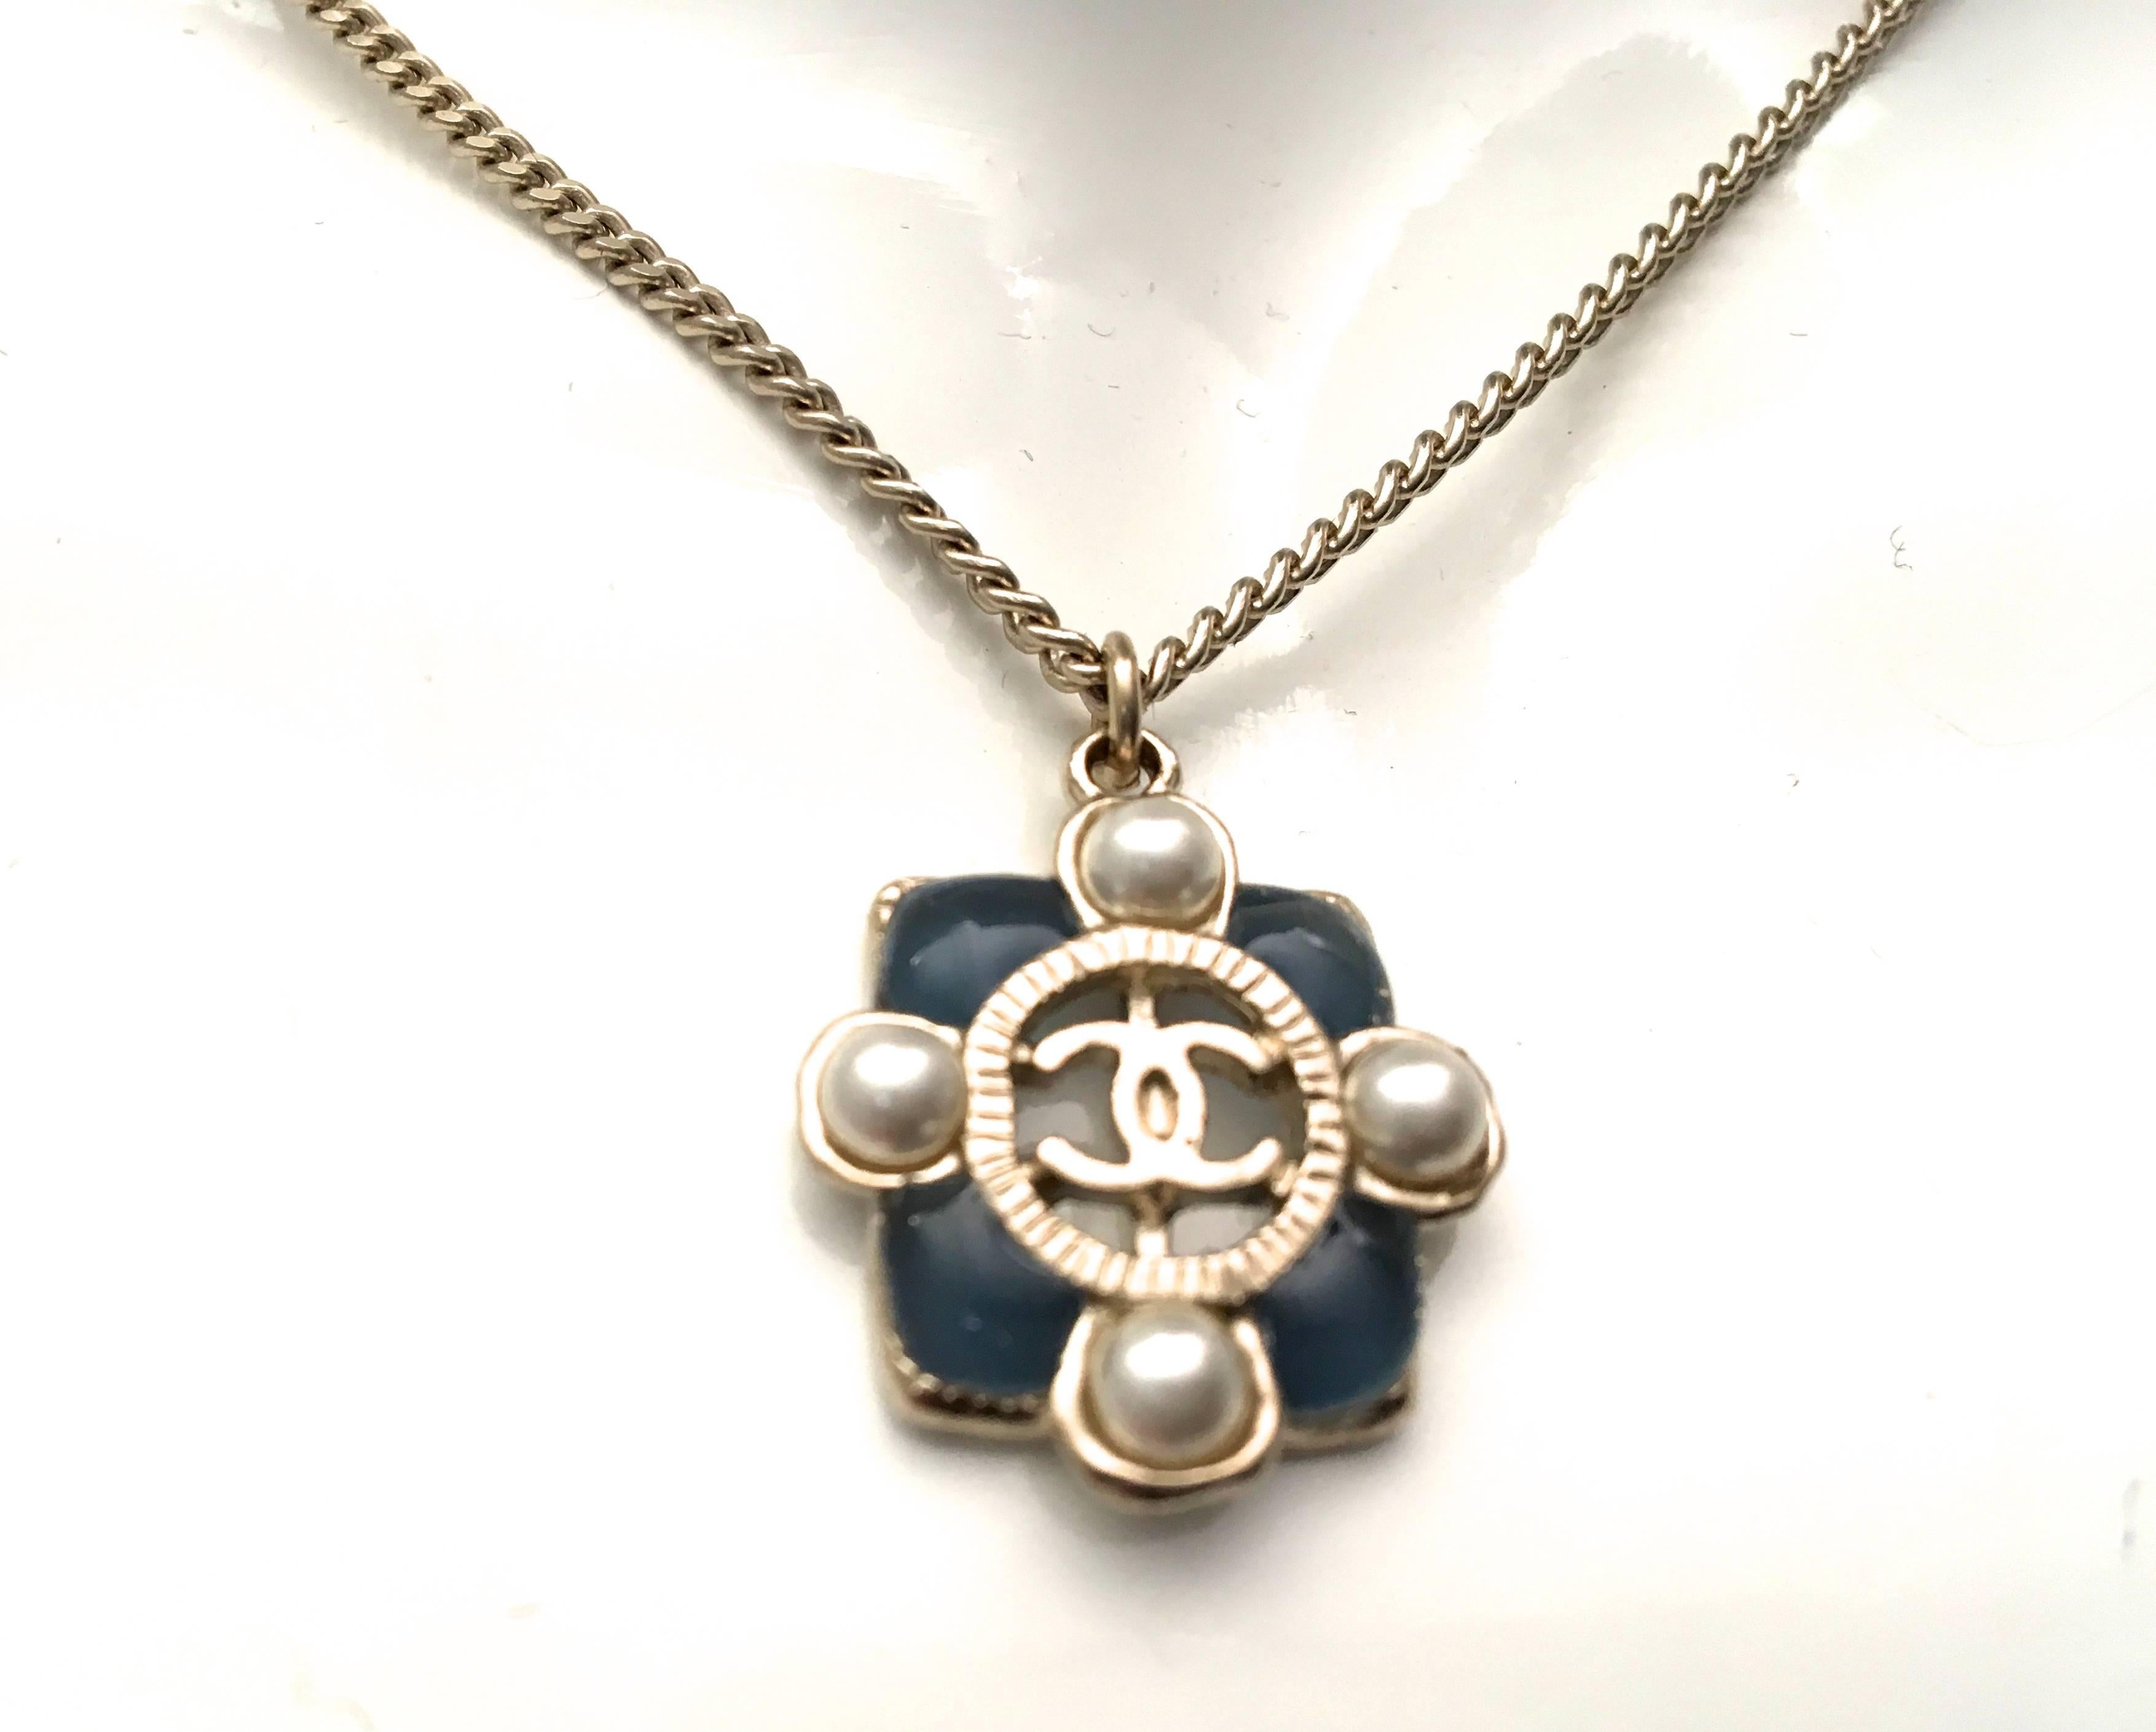 Presented here is a new Chanel medallion necklace from the 2015 collection. The medallion is comprised of a square medallion with a pearl on each side of the square. On each corner of the medallion there is a gripoix stone that is dark blue. The